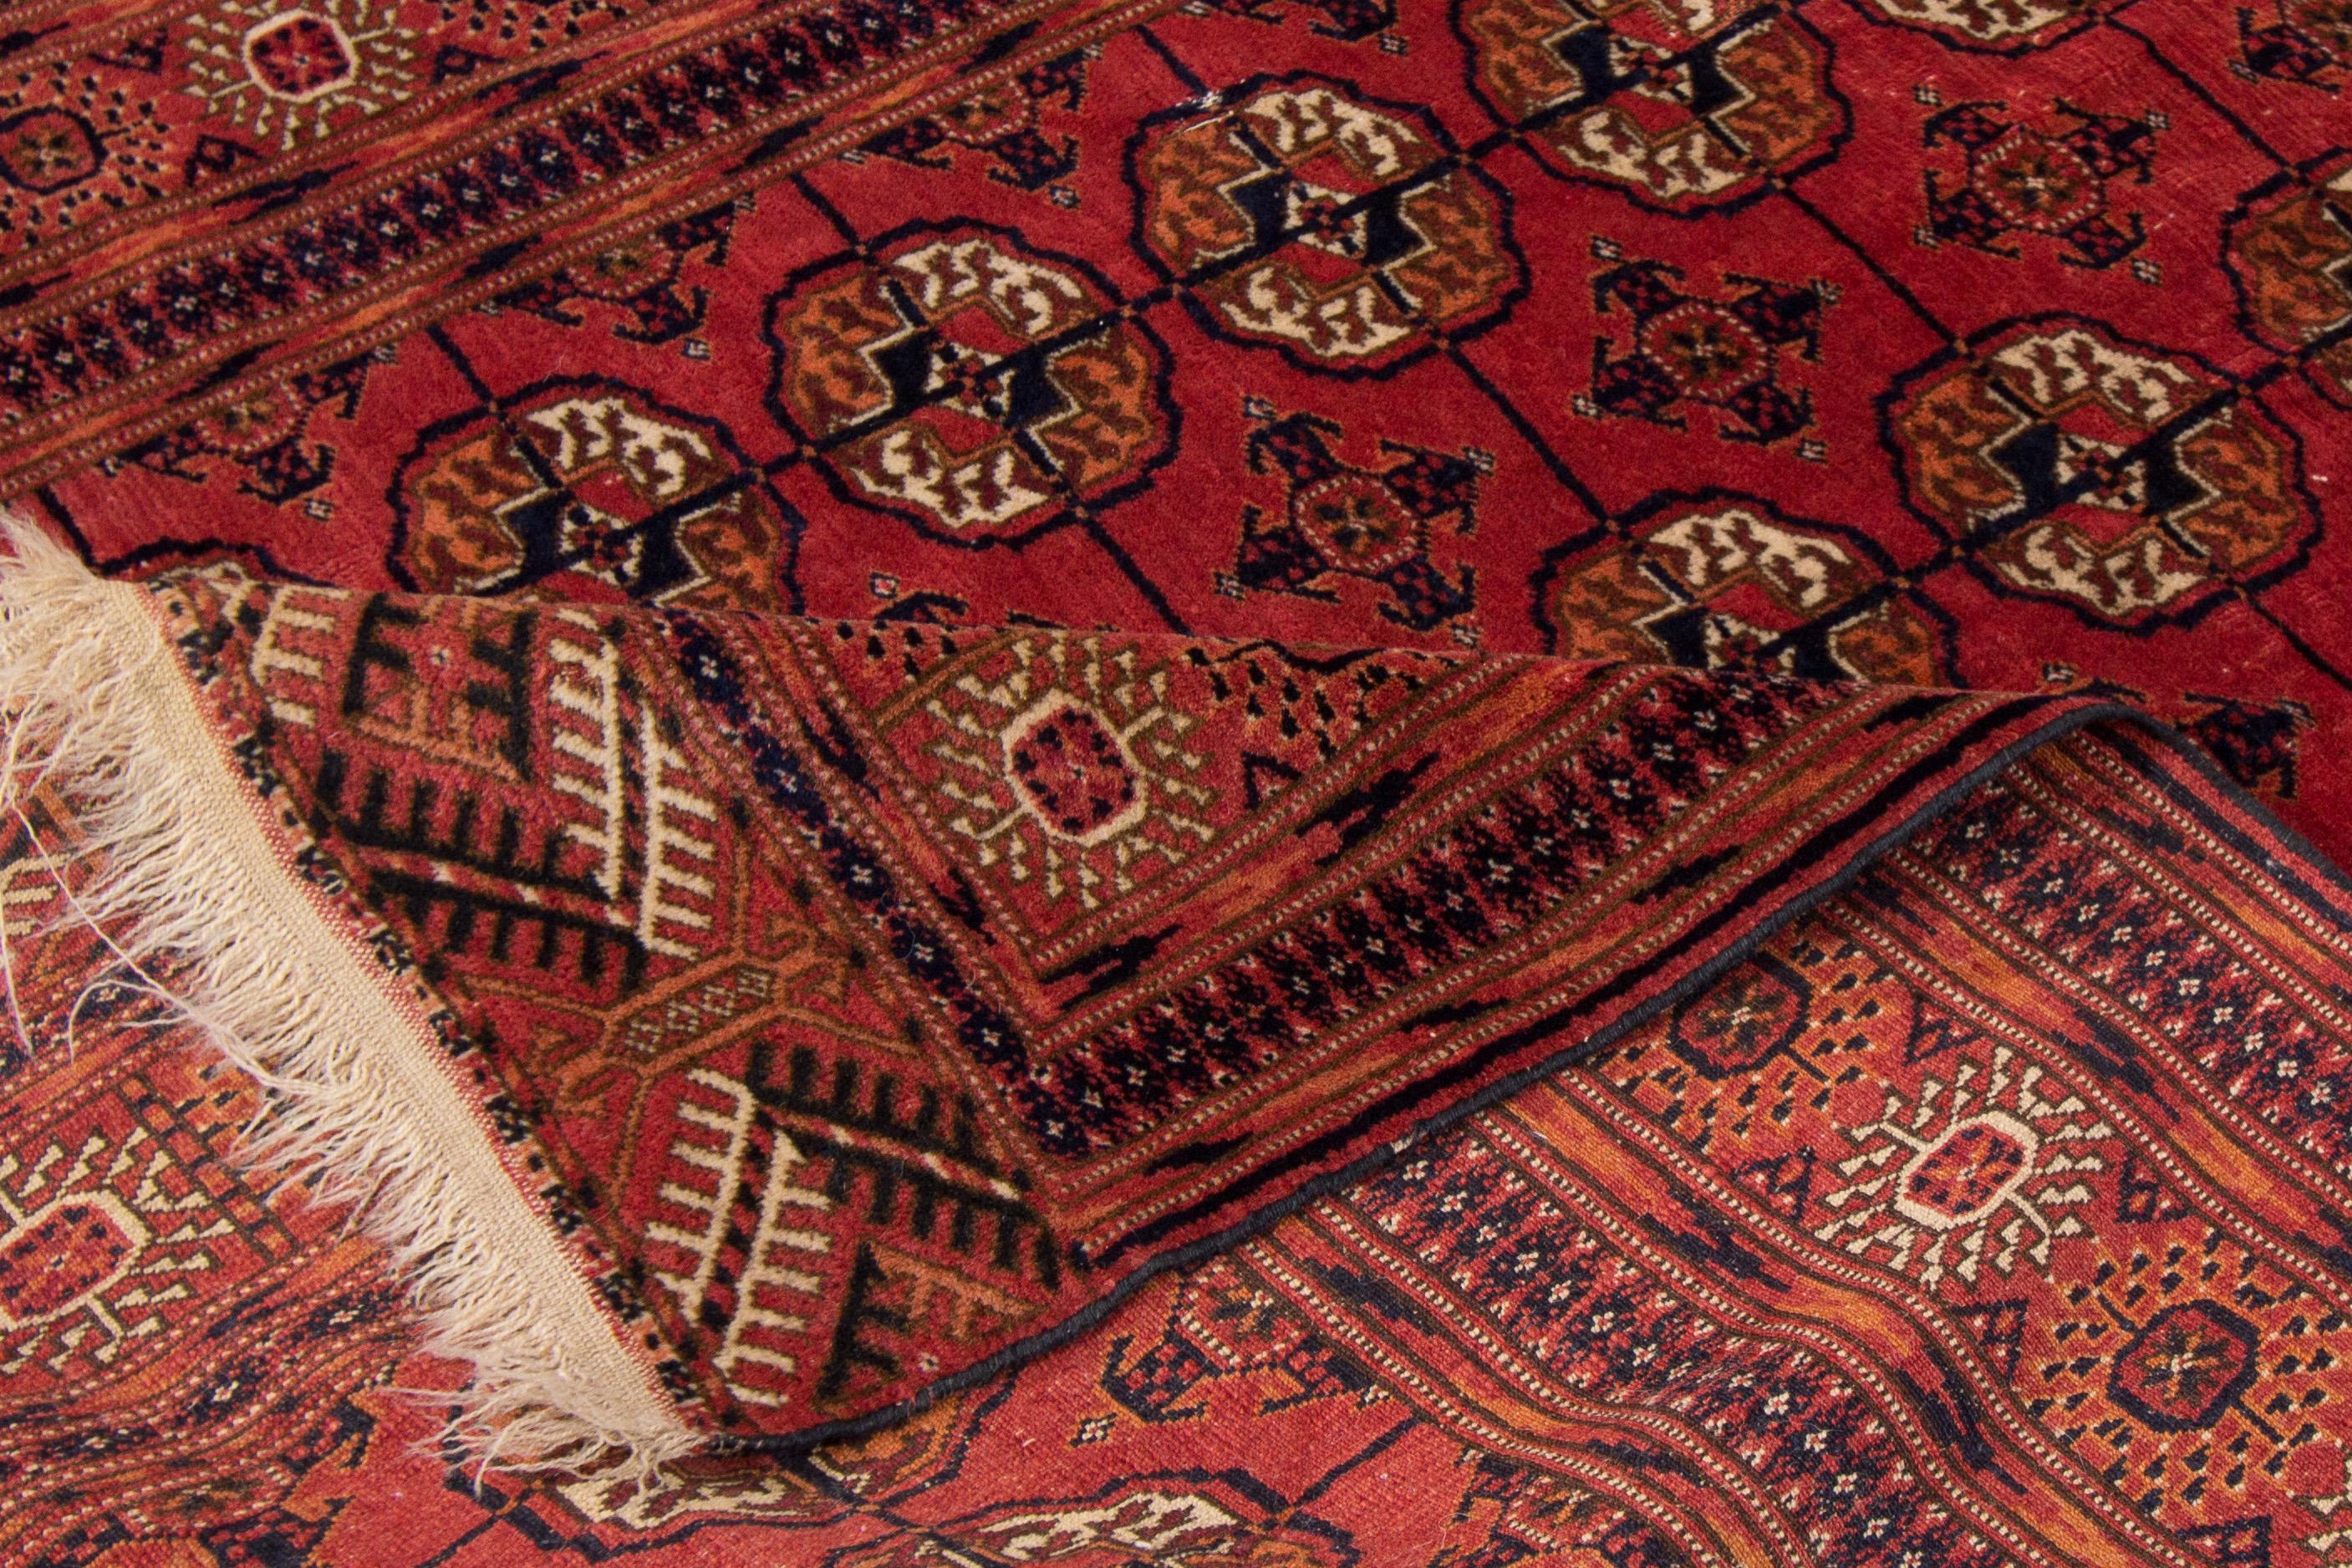 Beautiful vintage Turkmen hand-knotted wool rug with a red field. This Persian rug has ivory and blue accent in a gorgeous all-over geometric Pattern Design.

This rug measures: 4'1